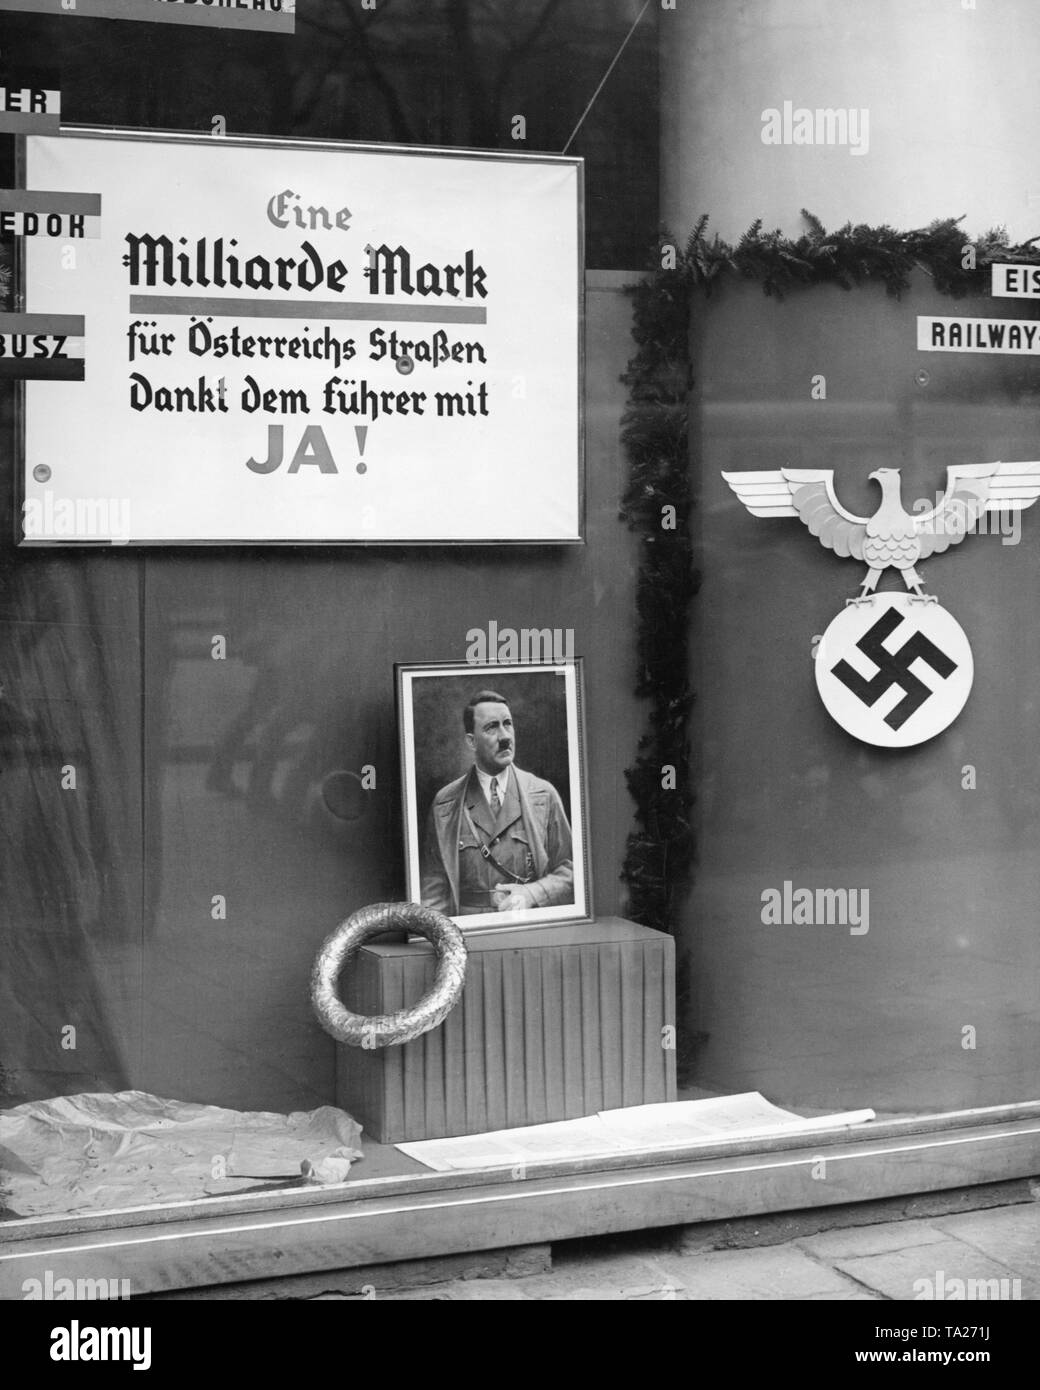 In Austria, is held a referendum on the annexation of Austria to the German Reich. In a Viennese shop window hangs an election poster for the plebiscite. It reads: 'One billion marks for Austria's roads / Thank to the Fuehrer with YES!'. Below is a portrait of Adolf Hitler. Stock Photo